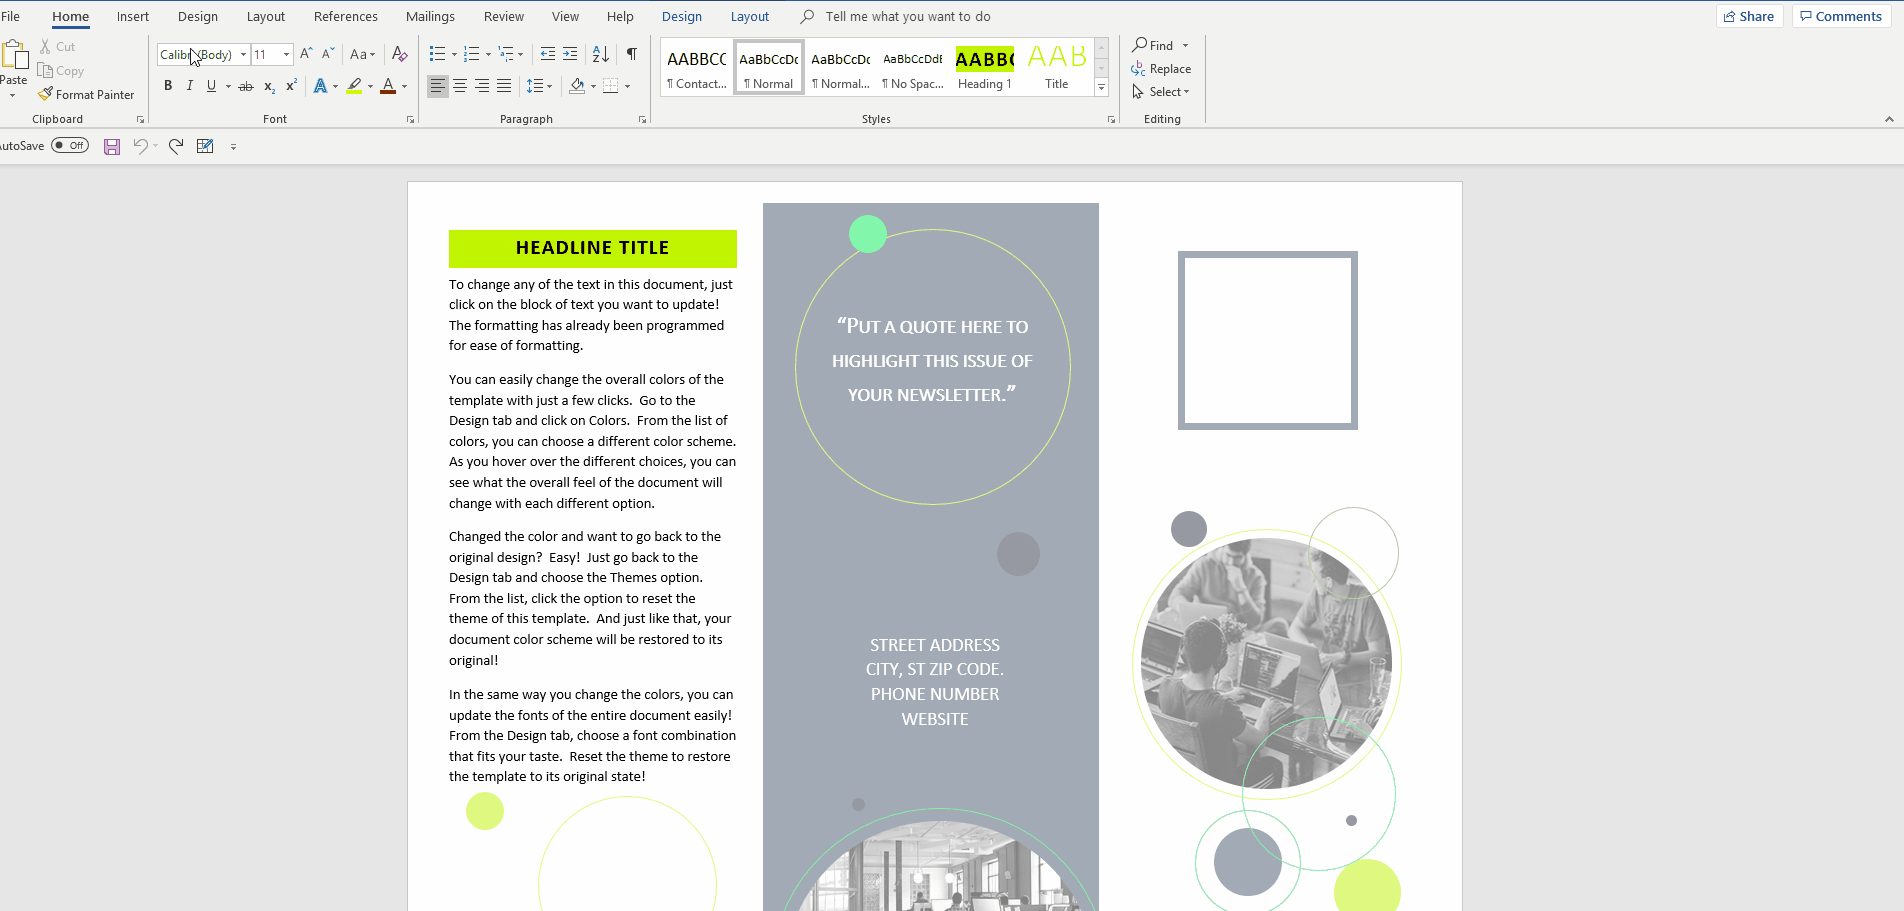 How To Get A Brochure Template On Microsoft Word from www.pdfconverter.com